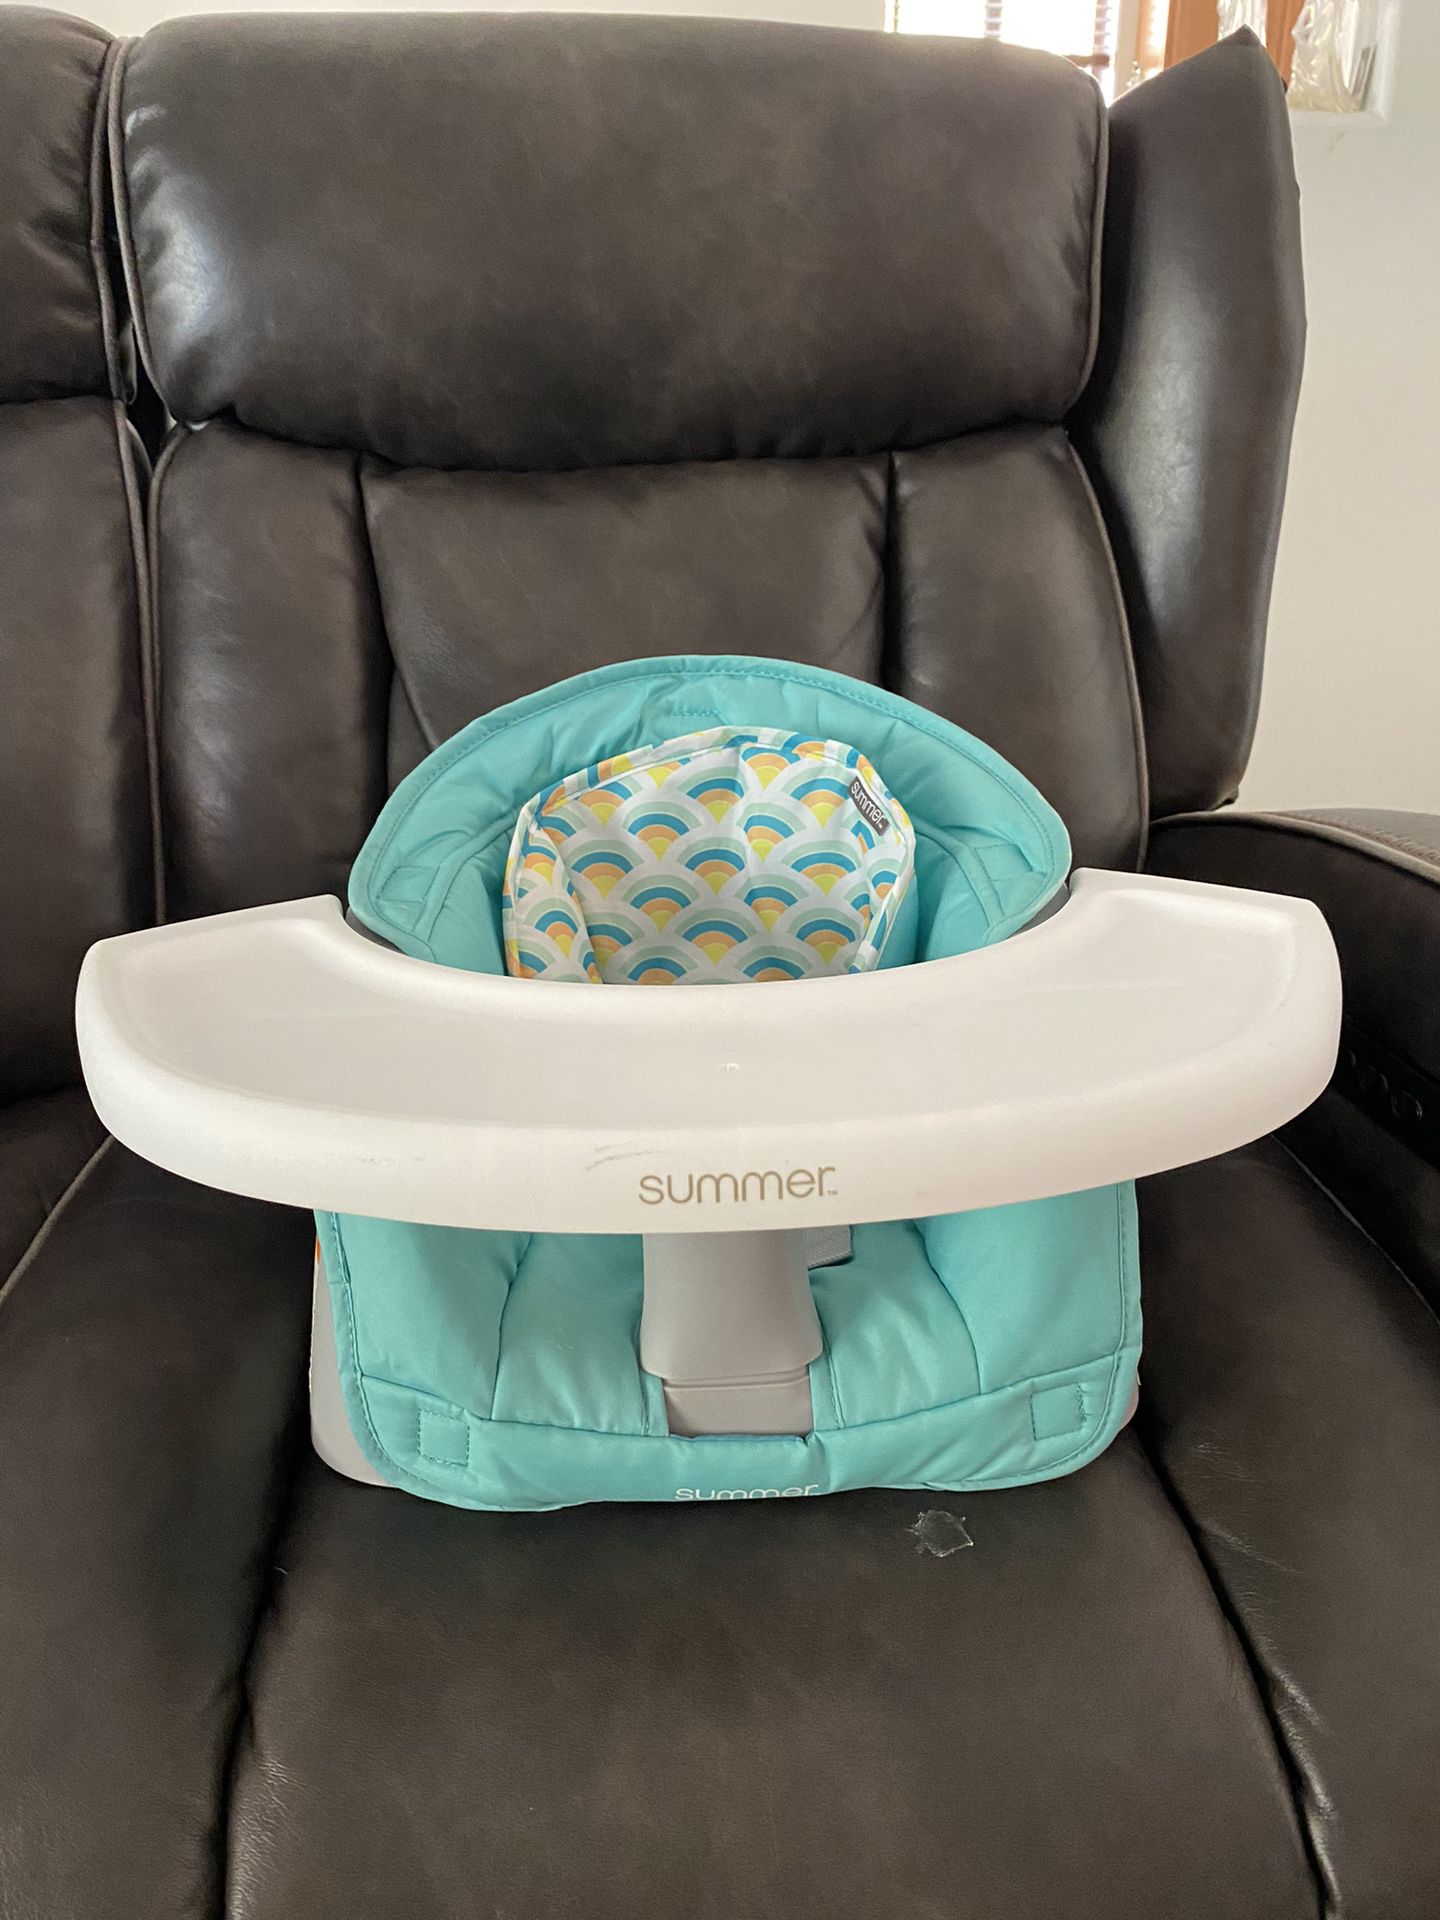 Infant Chair